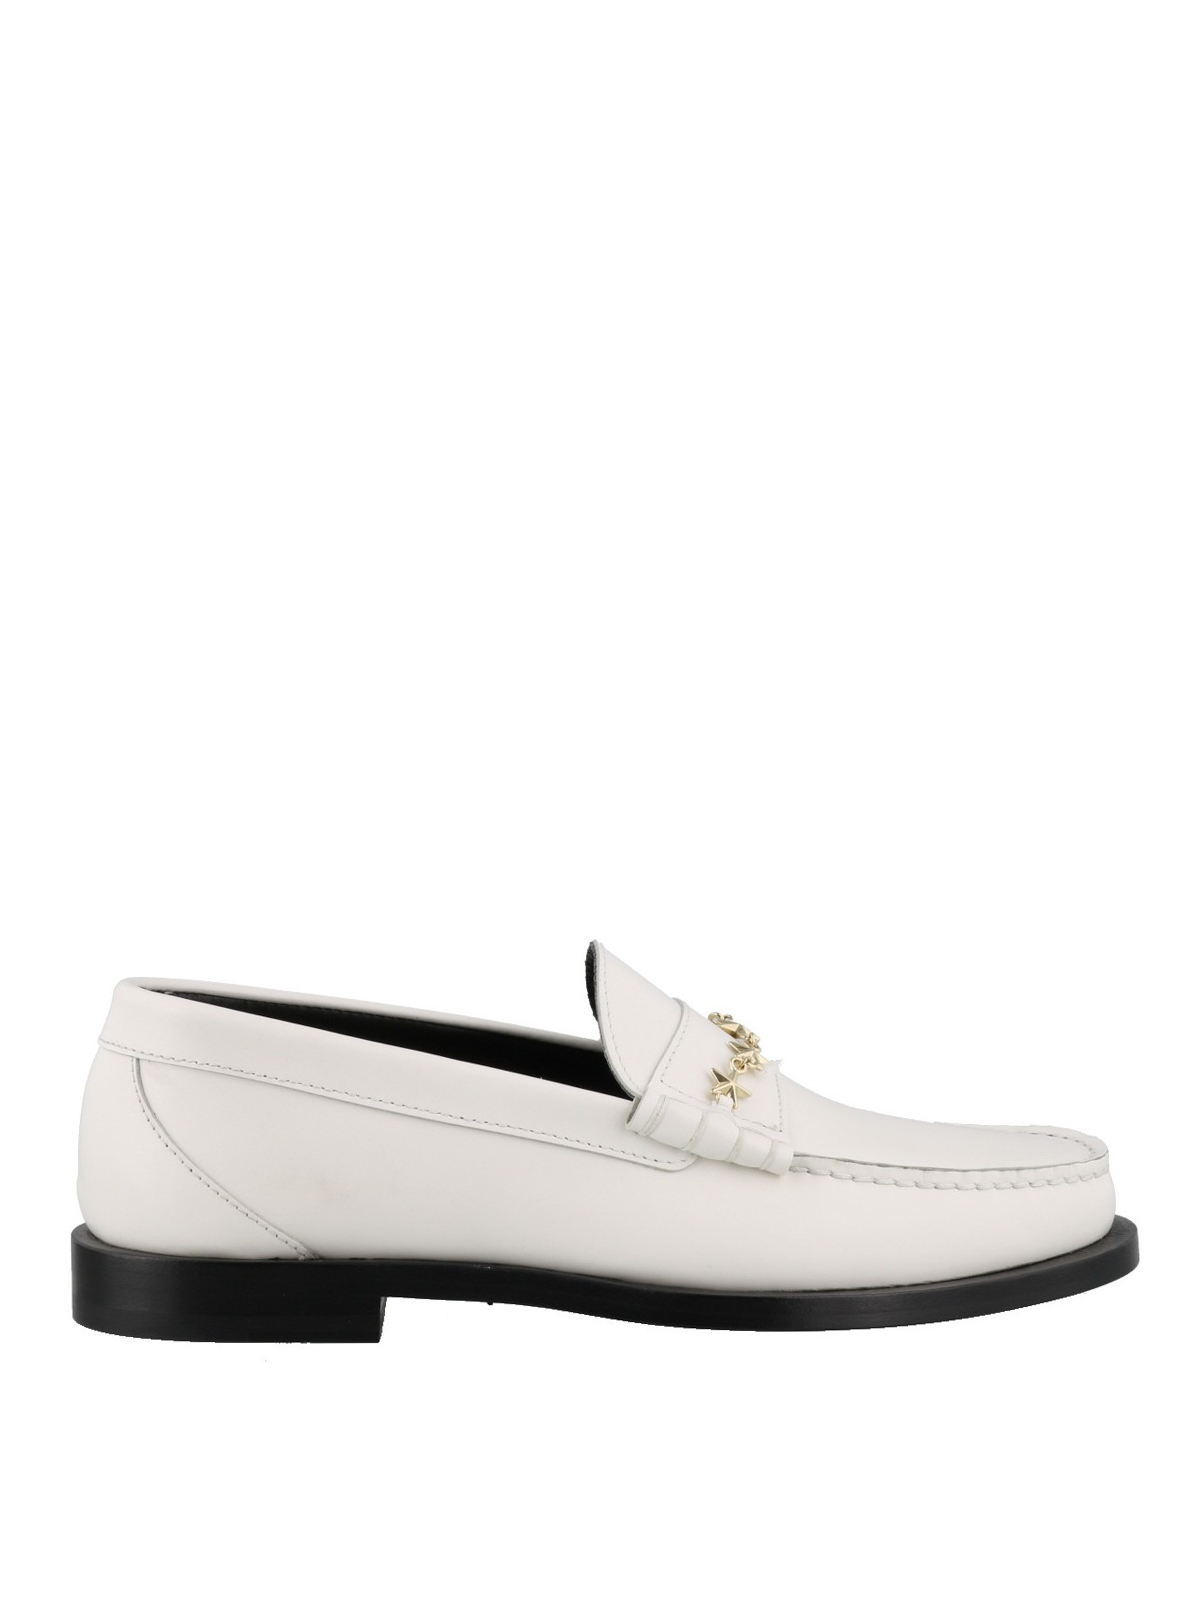 JIMMY CHOO MOCCA LOAFERS